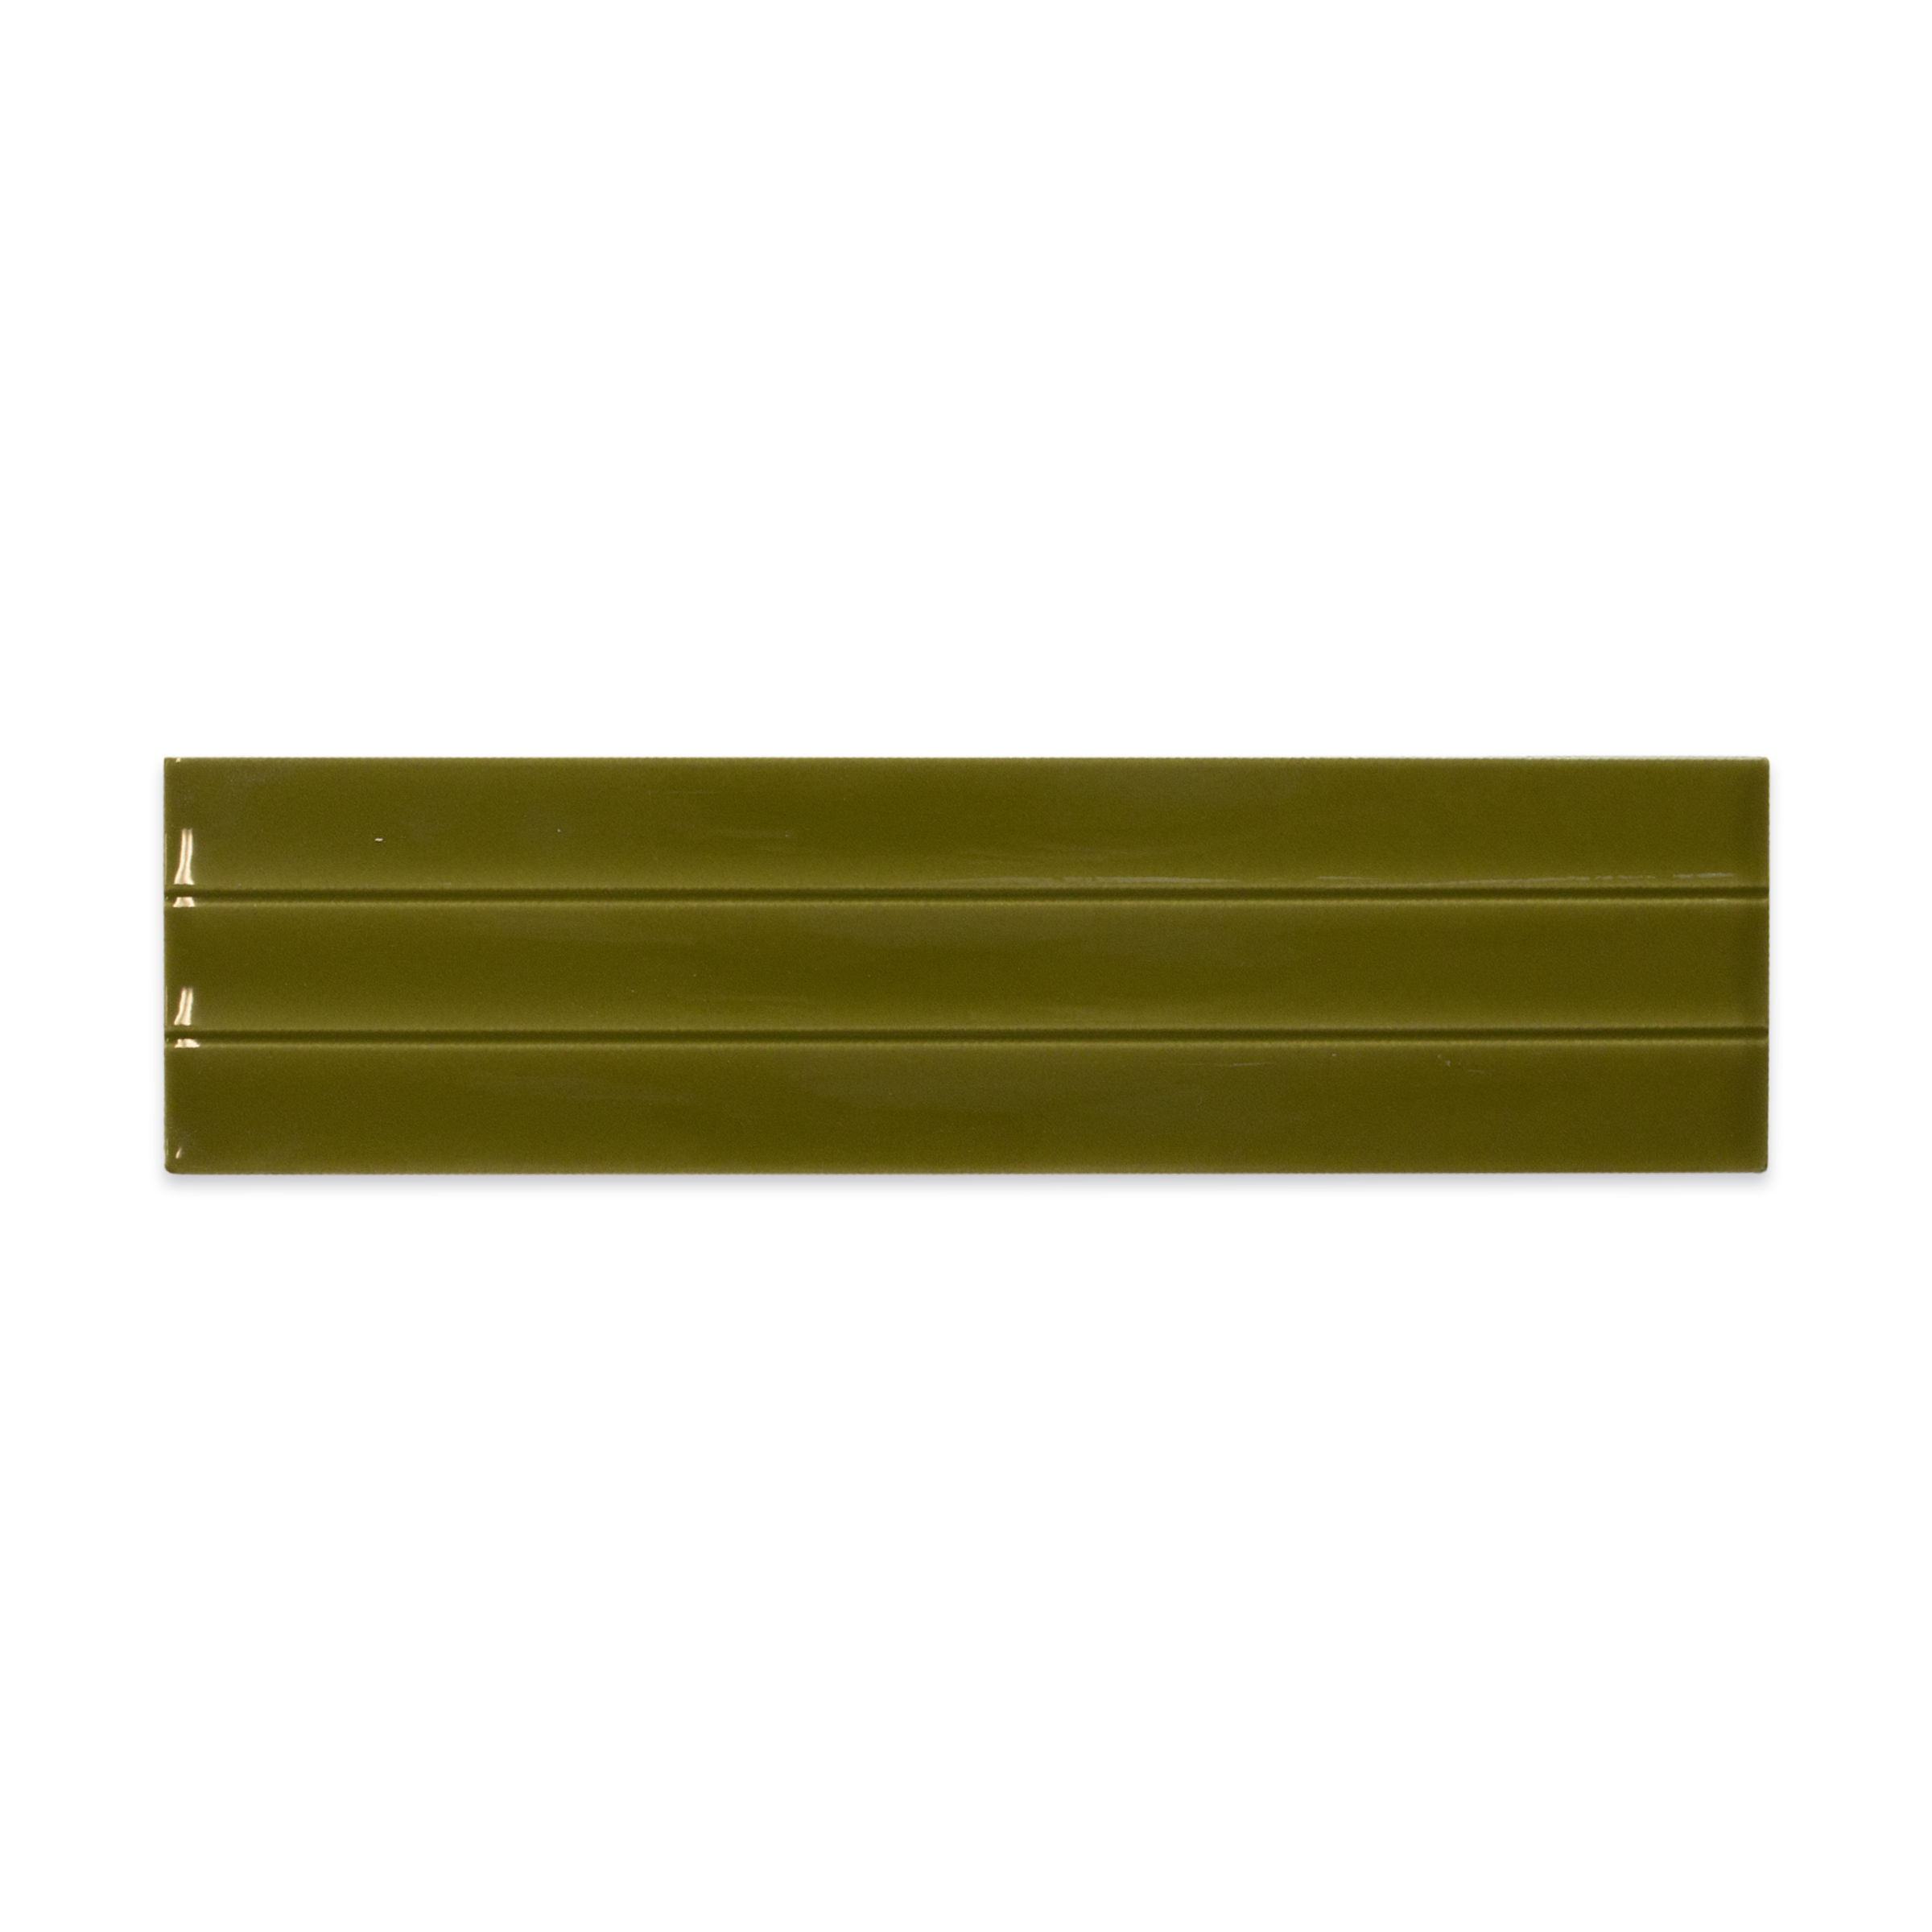 Relief Olive Drab Green Flat Ceramic Tile